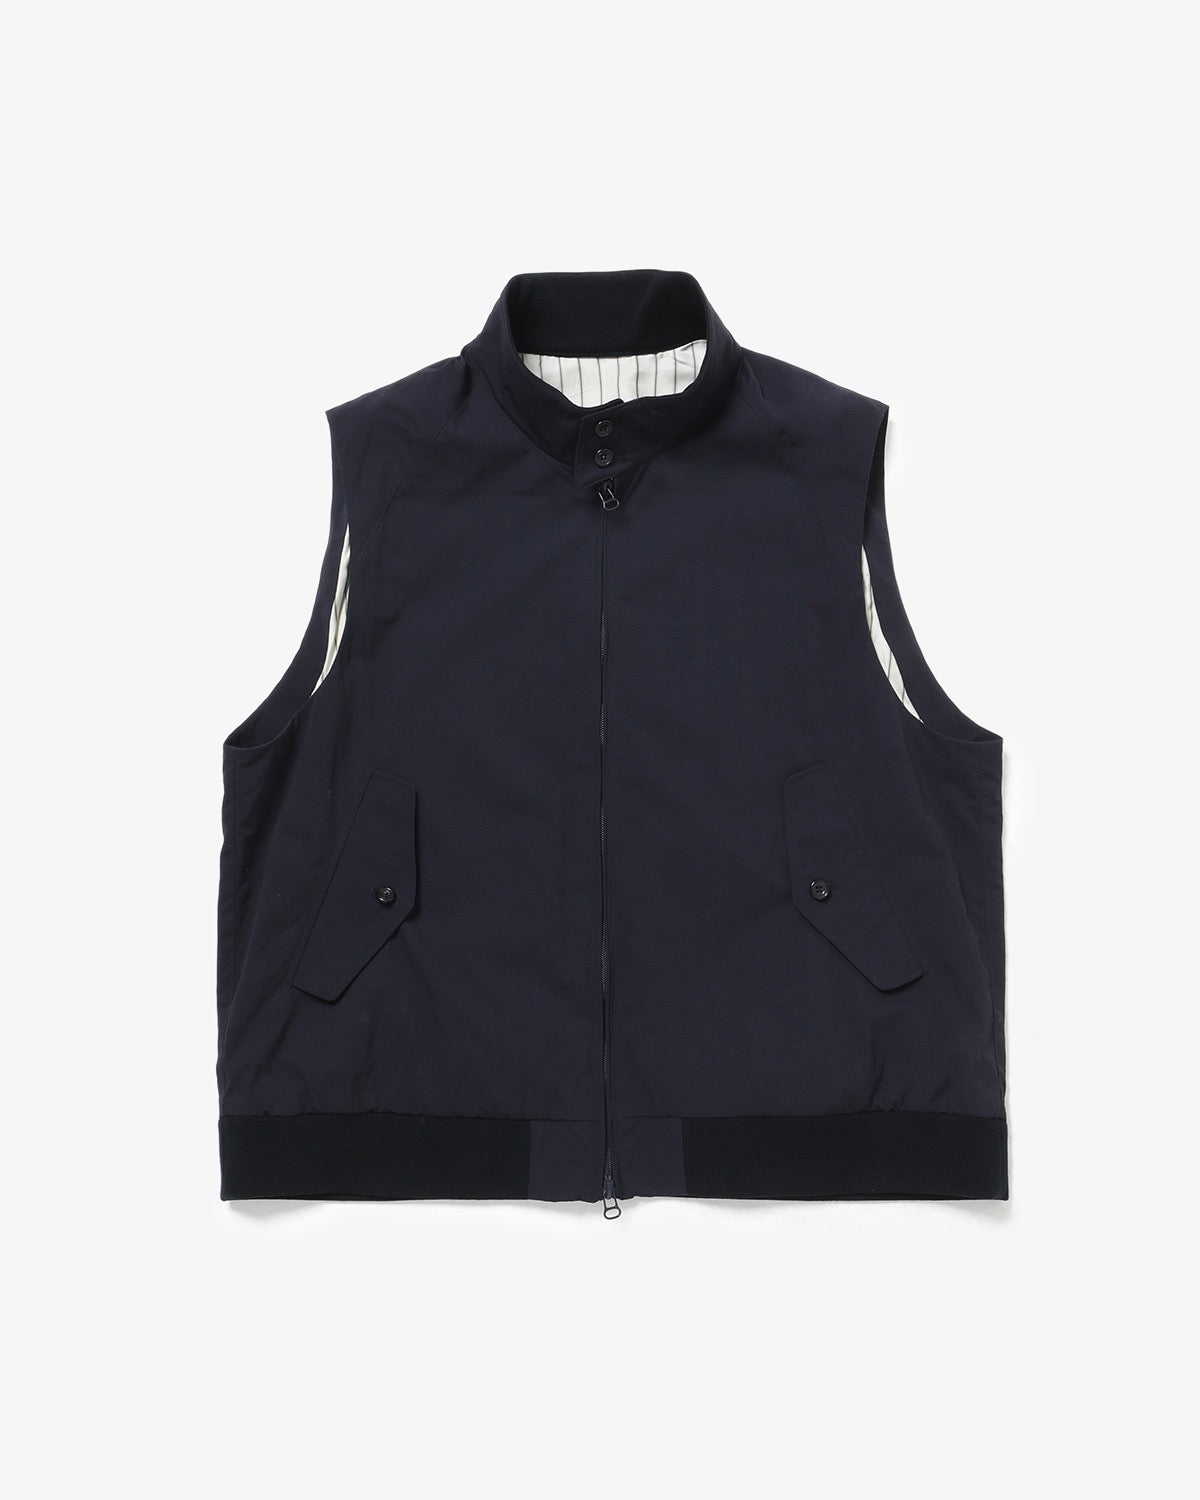 UNLIKELY ANYTHING GOLF VEST